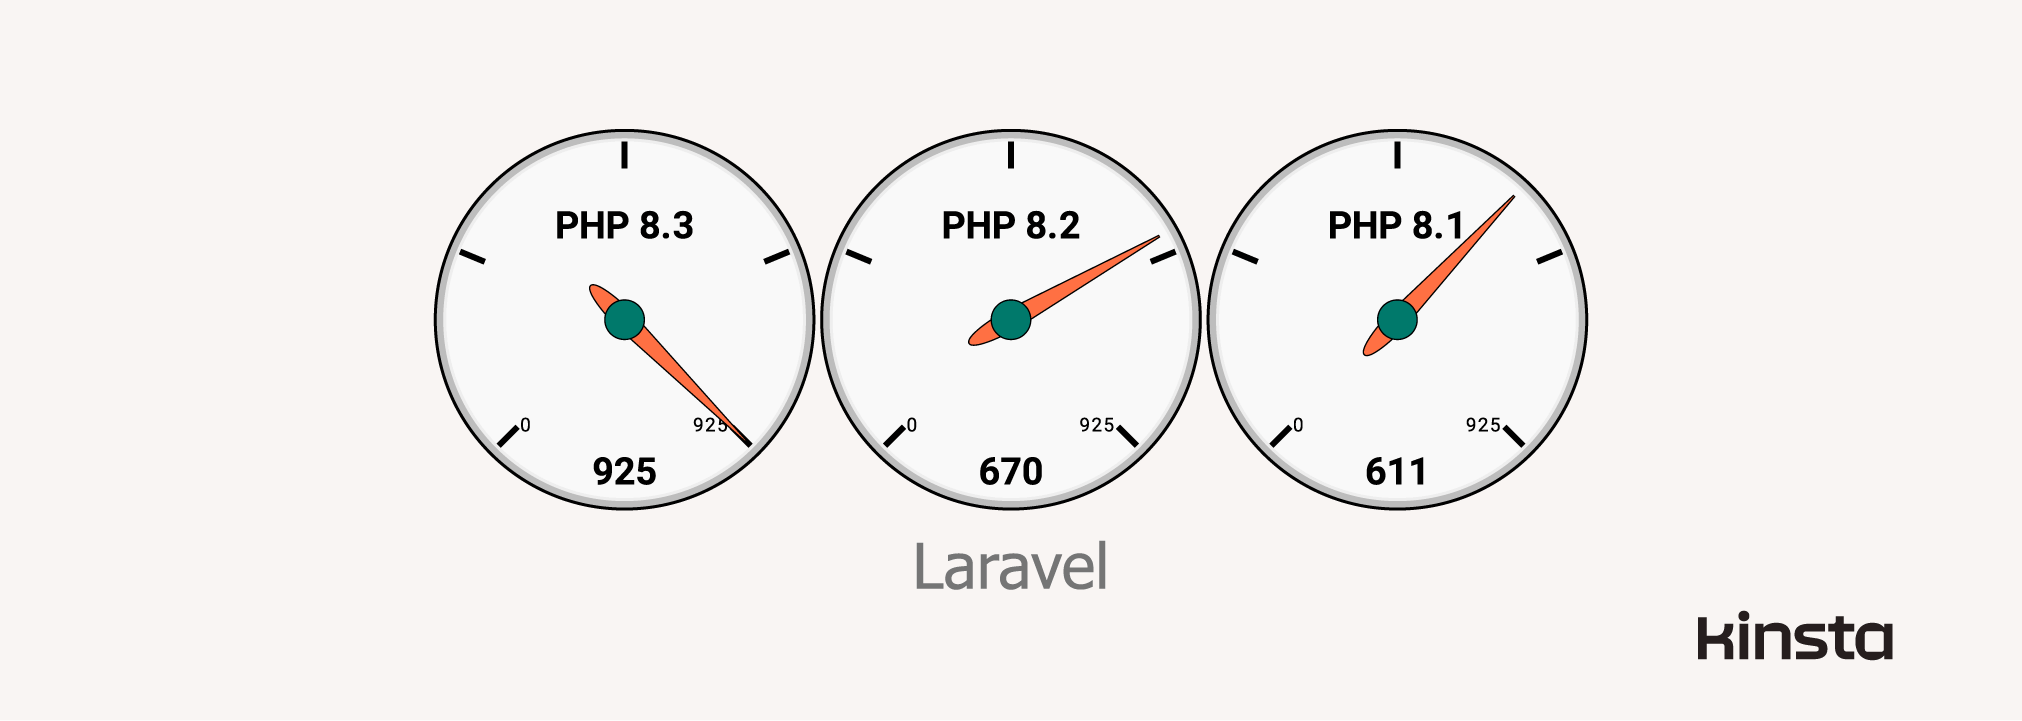 Laravel 10.16.1 performance on PHP 8.1, 8.2, and 8.3 (in requests/second).